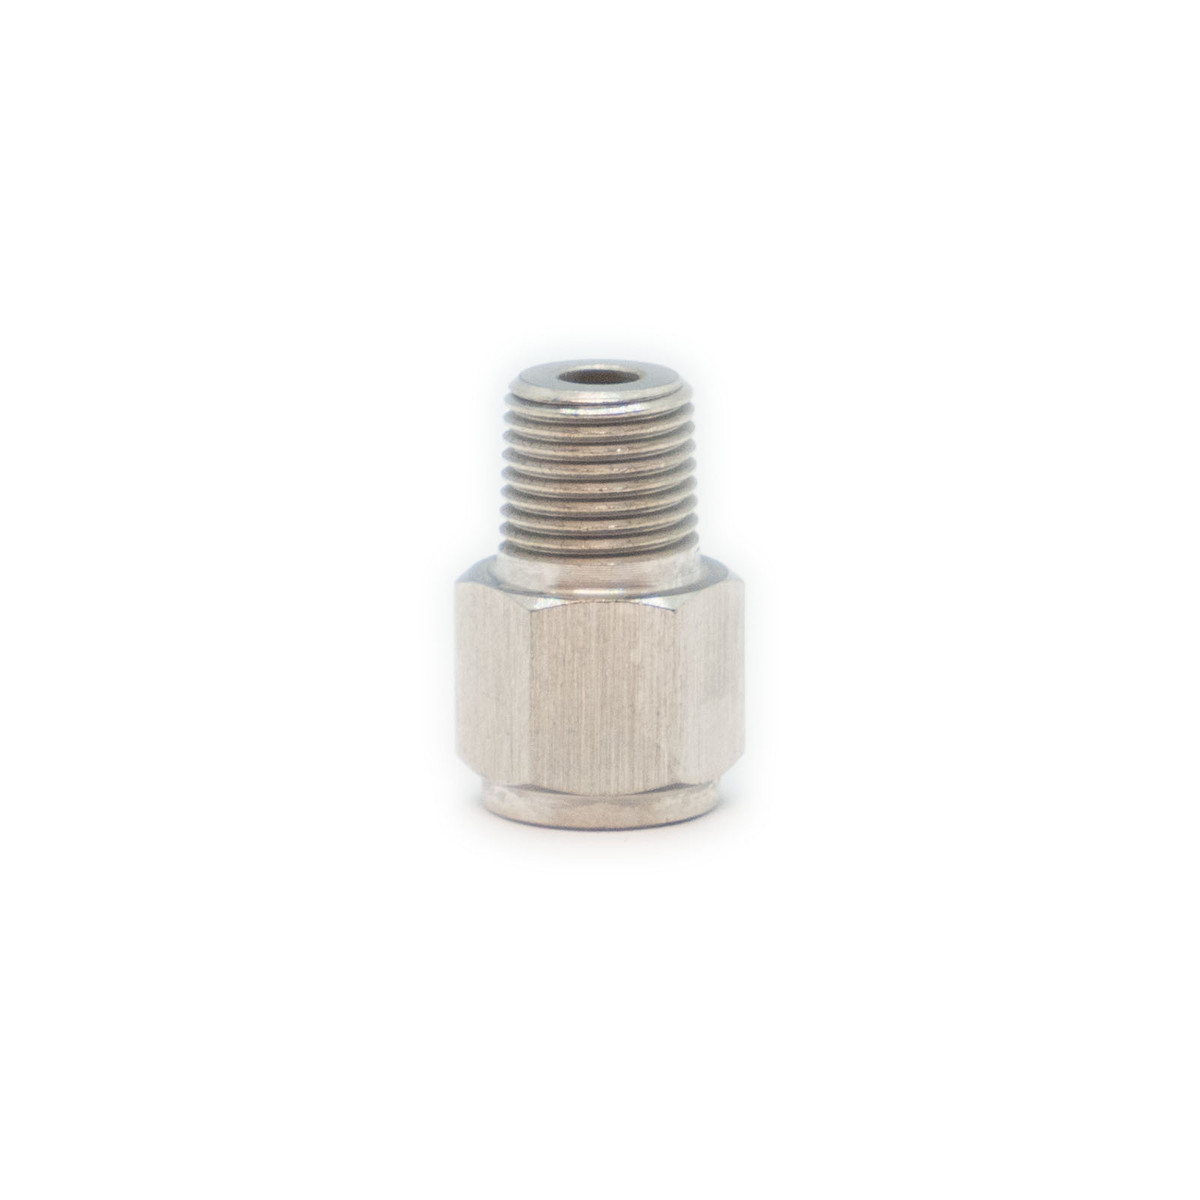 #Adapter M10 x 1 Female to 1/8 BSP Male